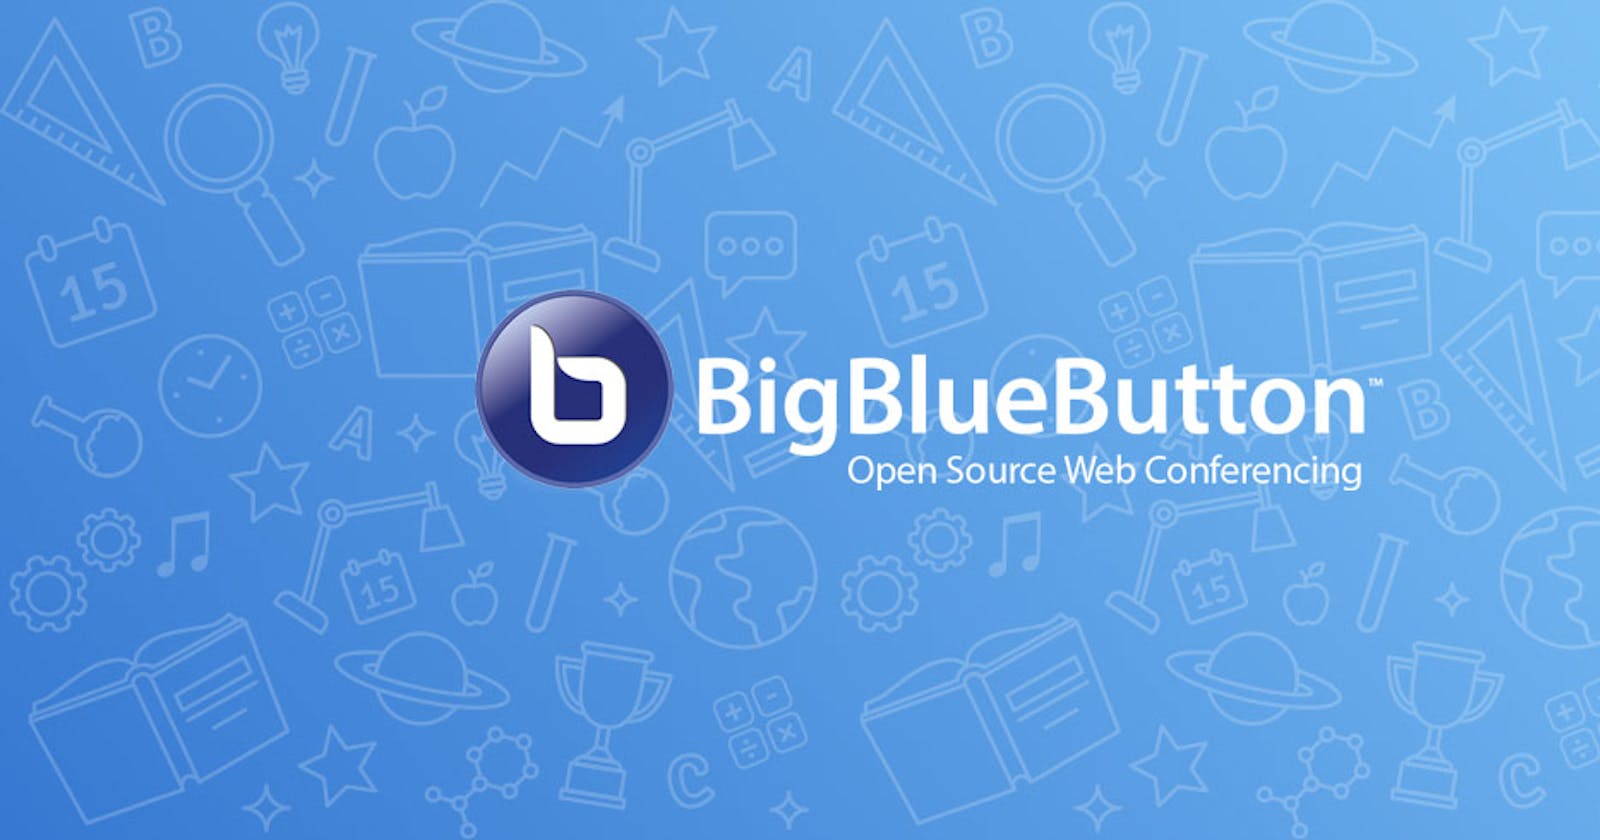 How to Install and Configure Big Blue Button on Ubuntu 18